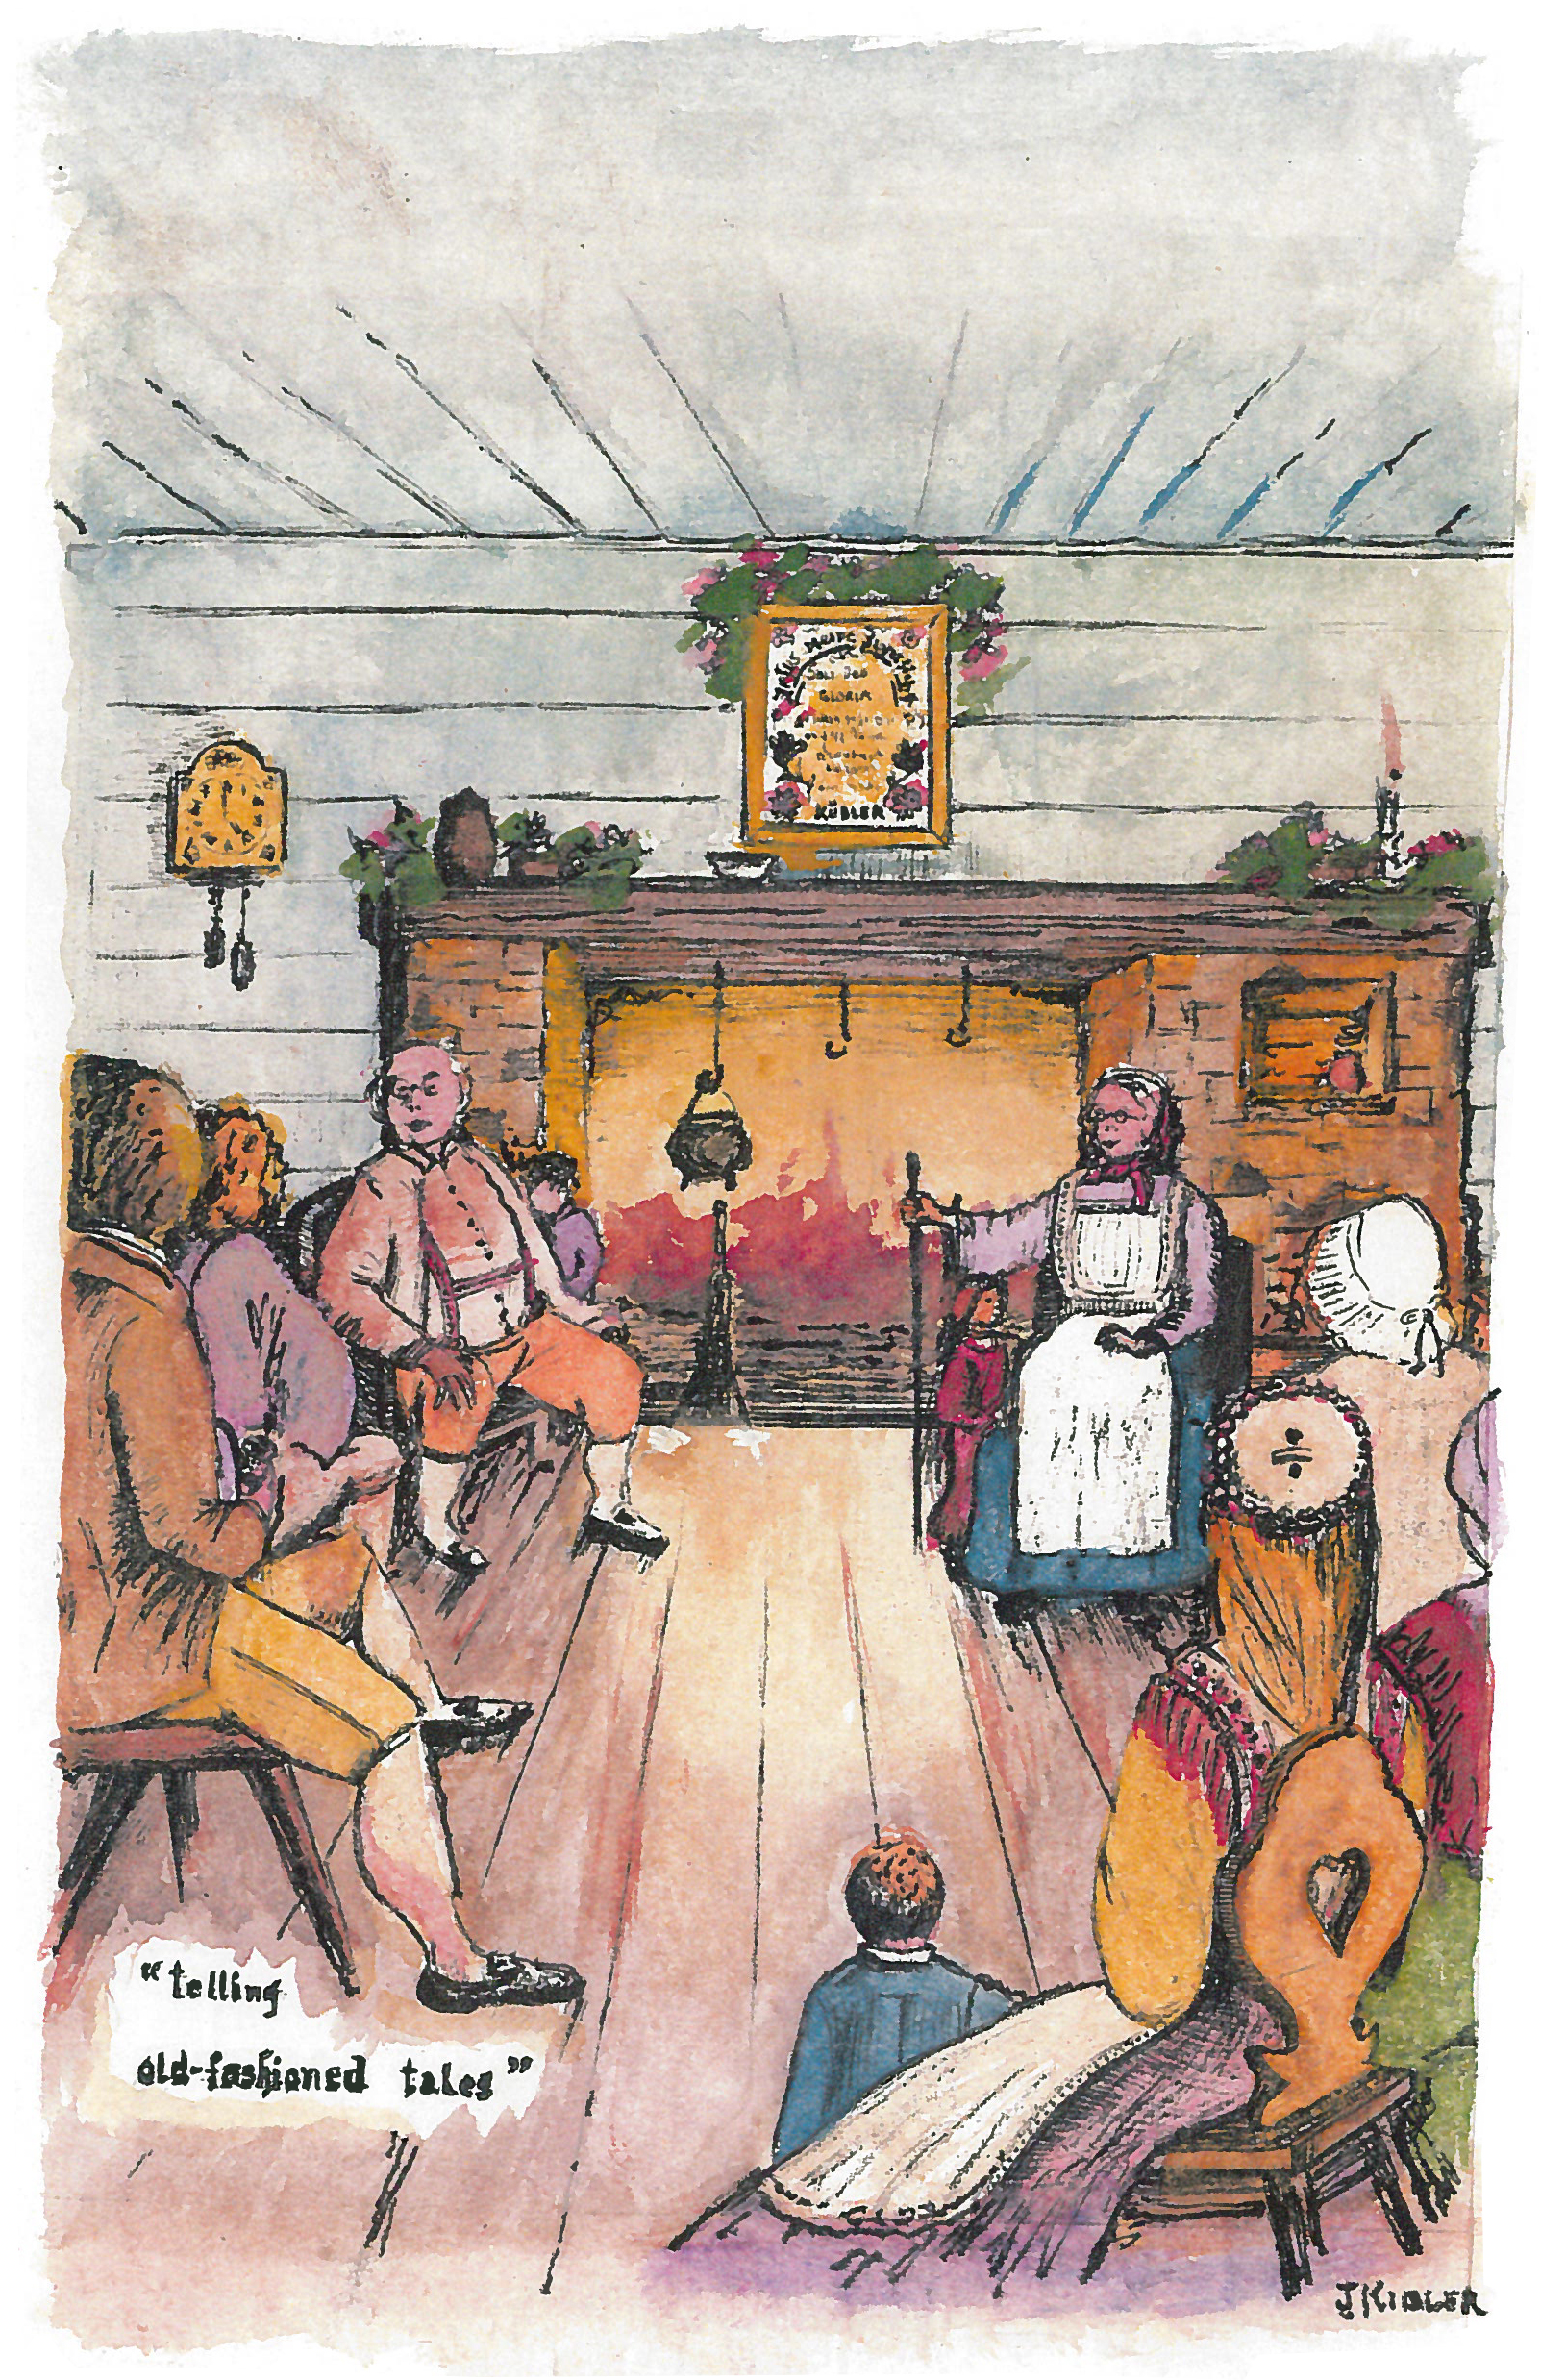 At the Dutch Fork fireside during the 12 days of Christmas. Illustrated by the author for Fireside Tales: Stories of the Old Dutch Fork (1984).
